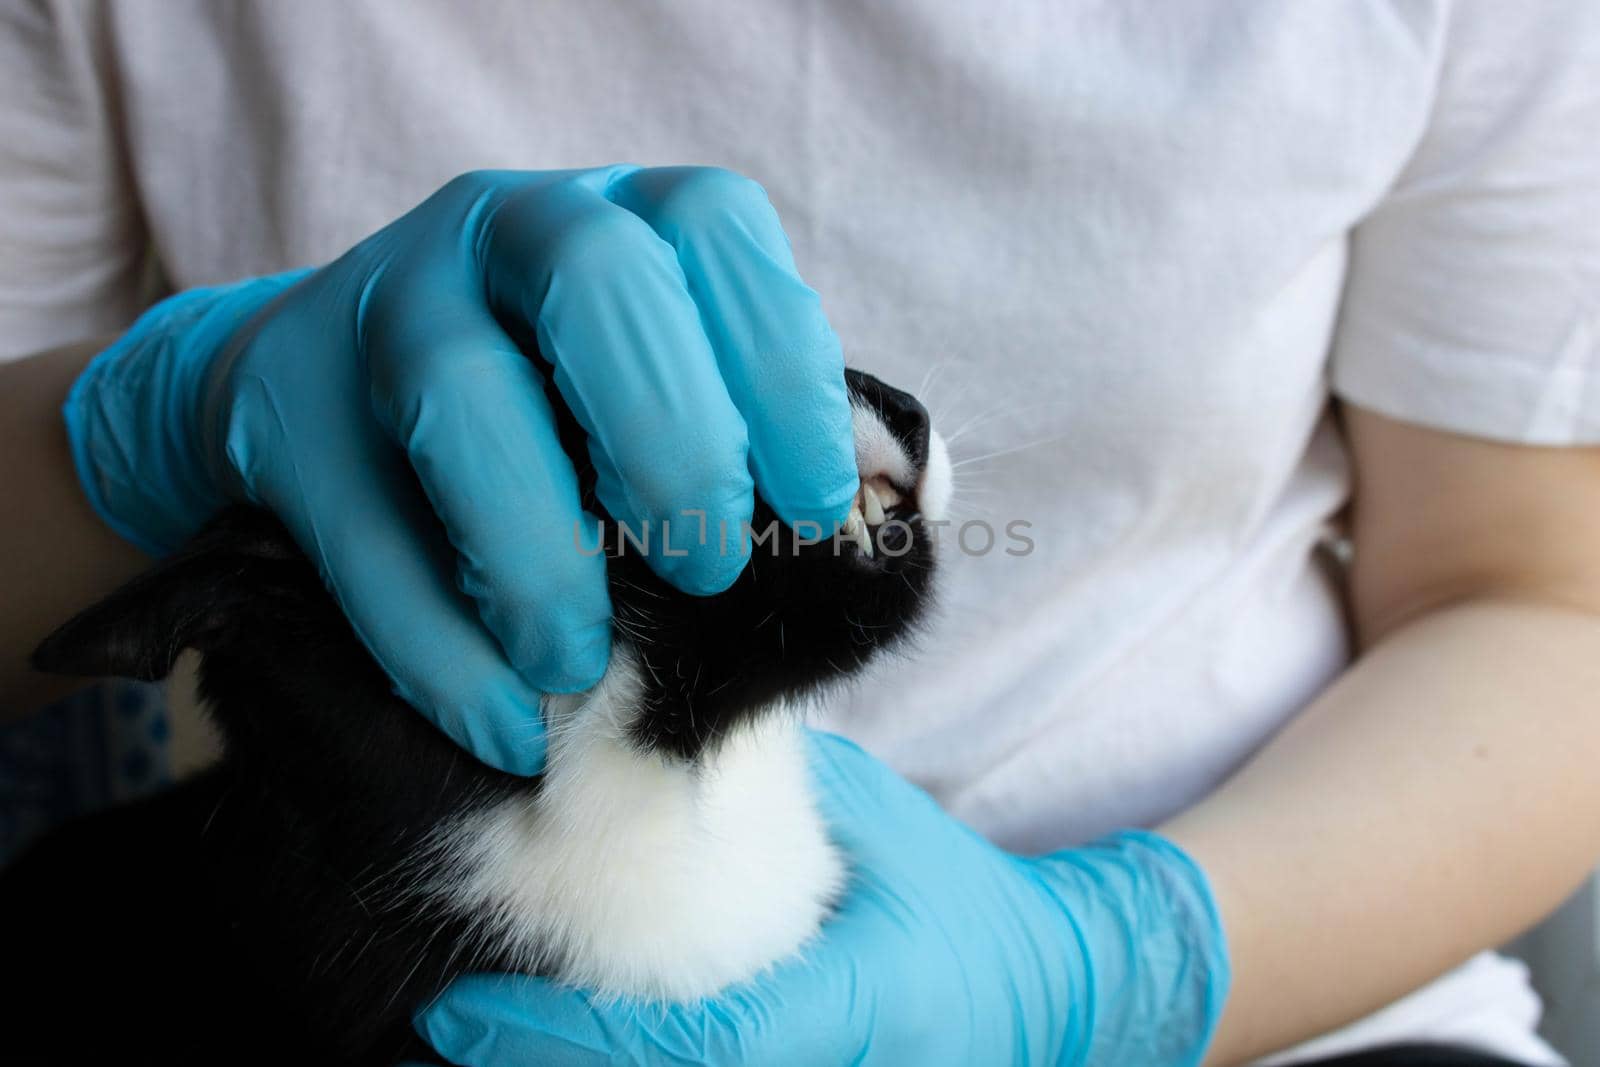 A veterinarian examines a black cat's teeth at the clinic.